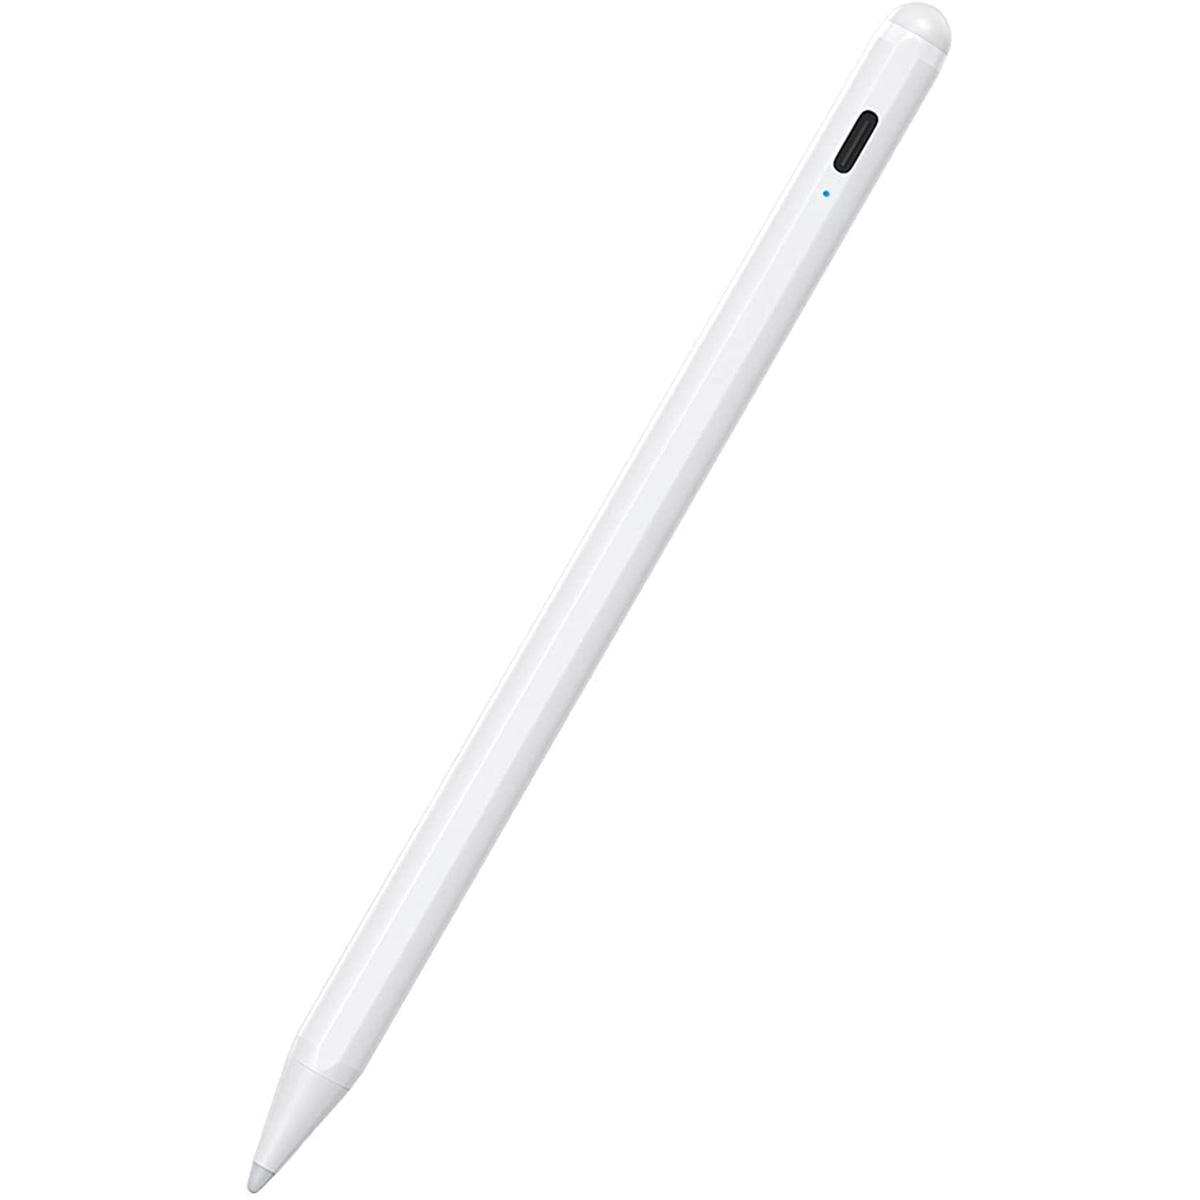 Apple iPad Jamejake Stylus Pen with Palm Rejection for $12.59 Shipped